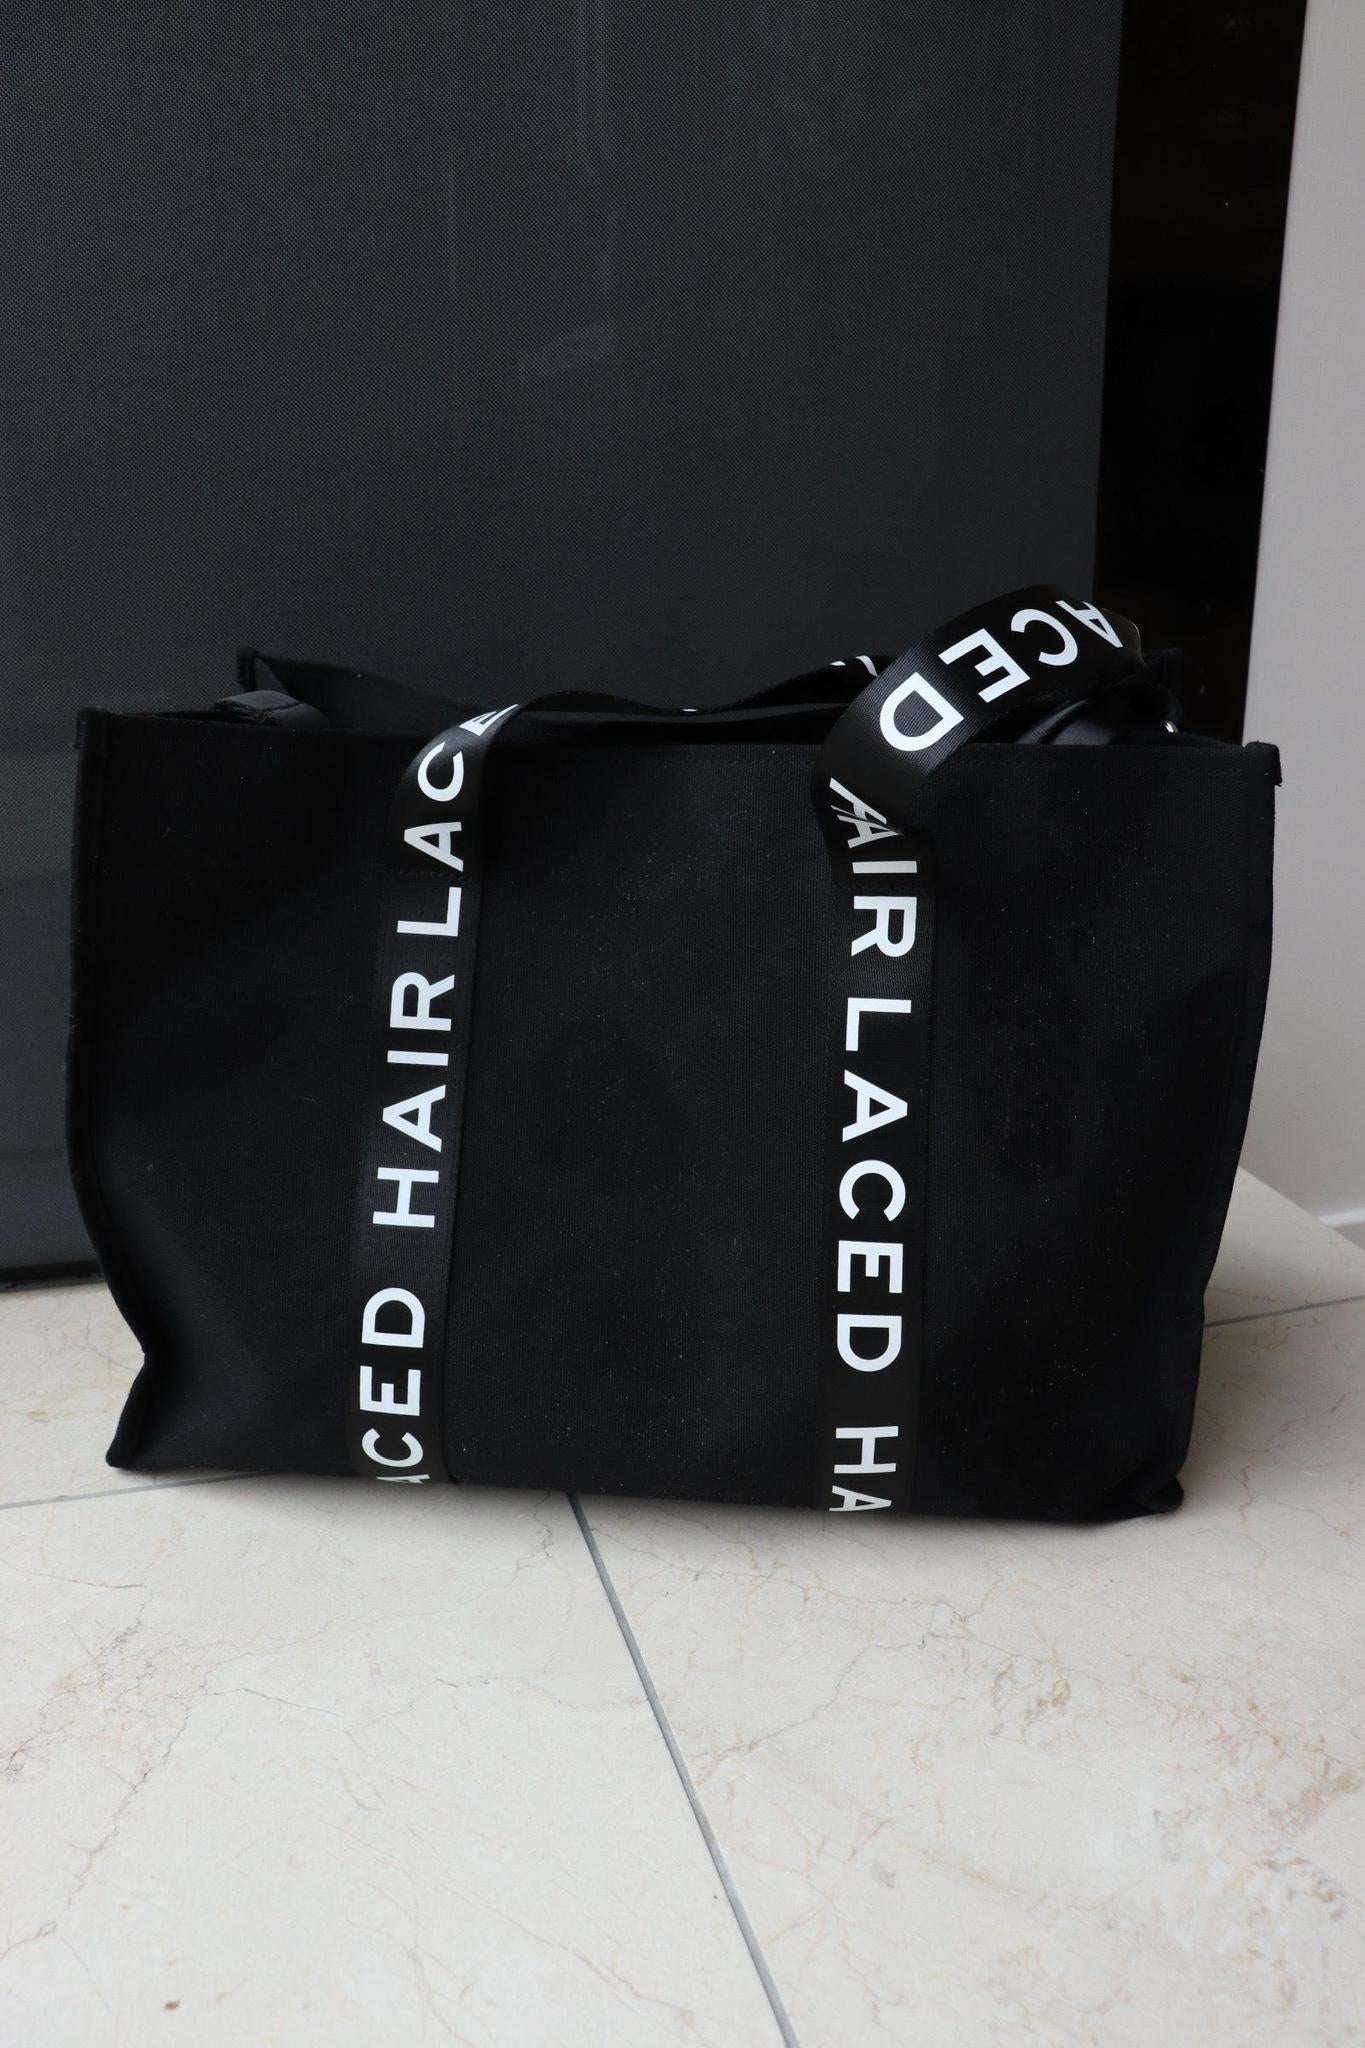 Laced Hair Everyday Carry-All Tote